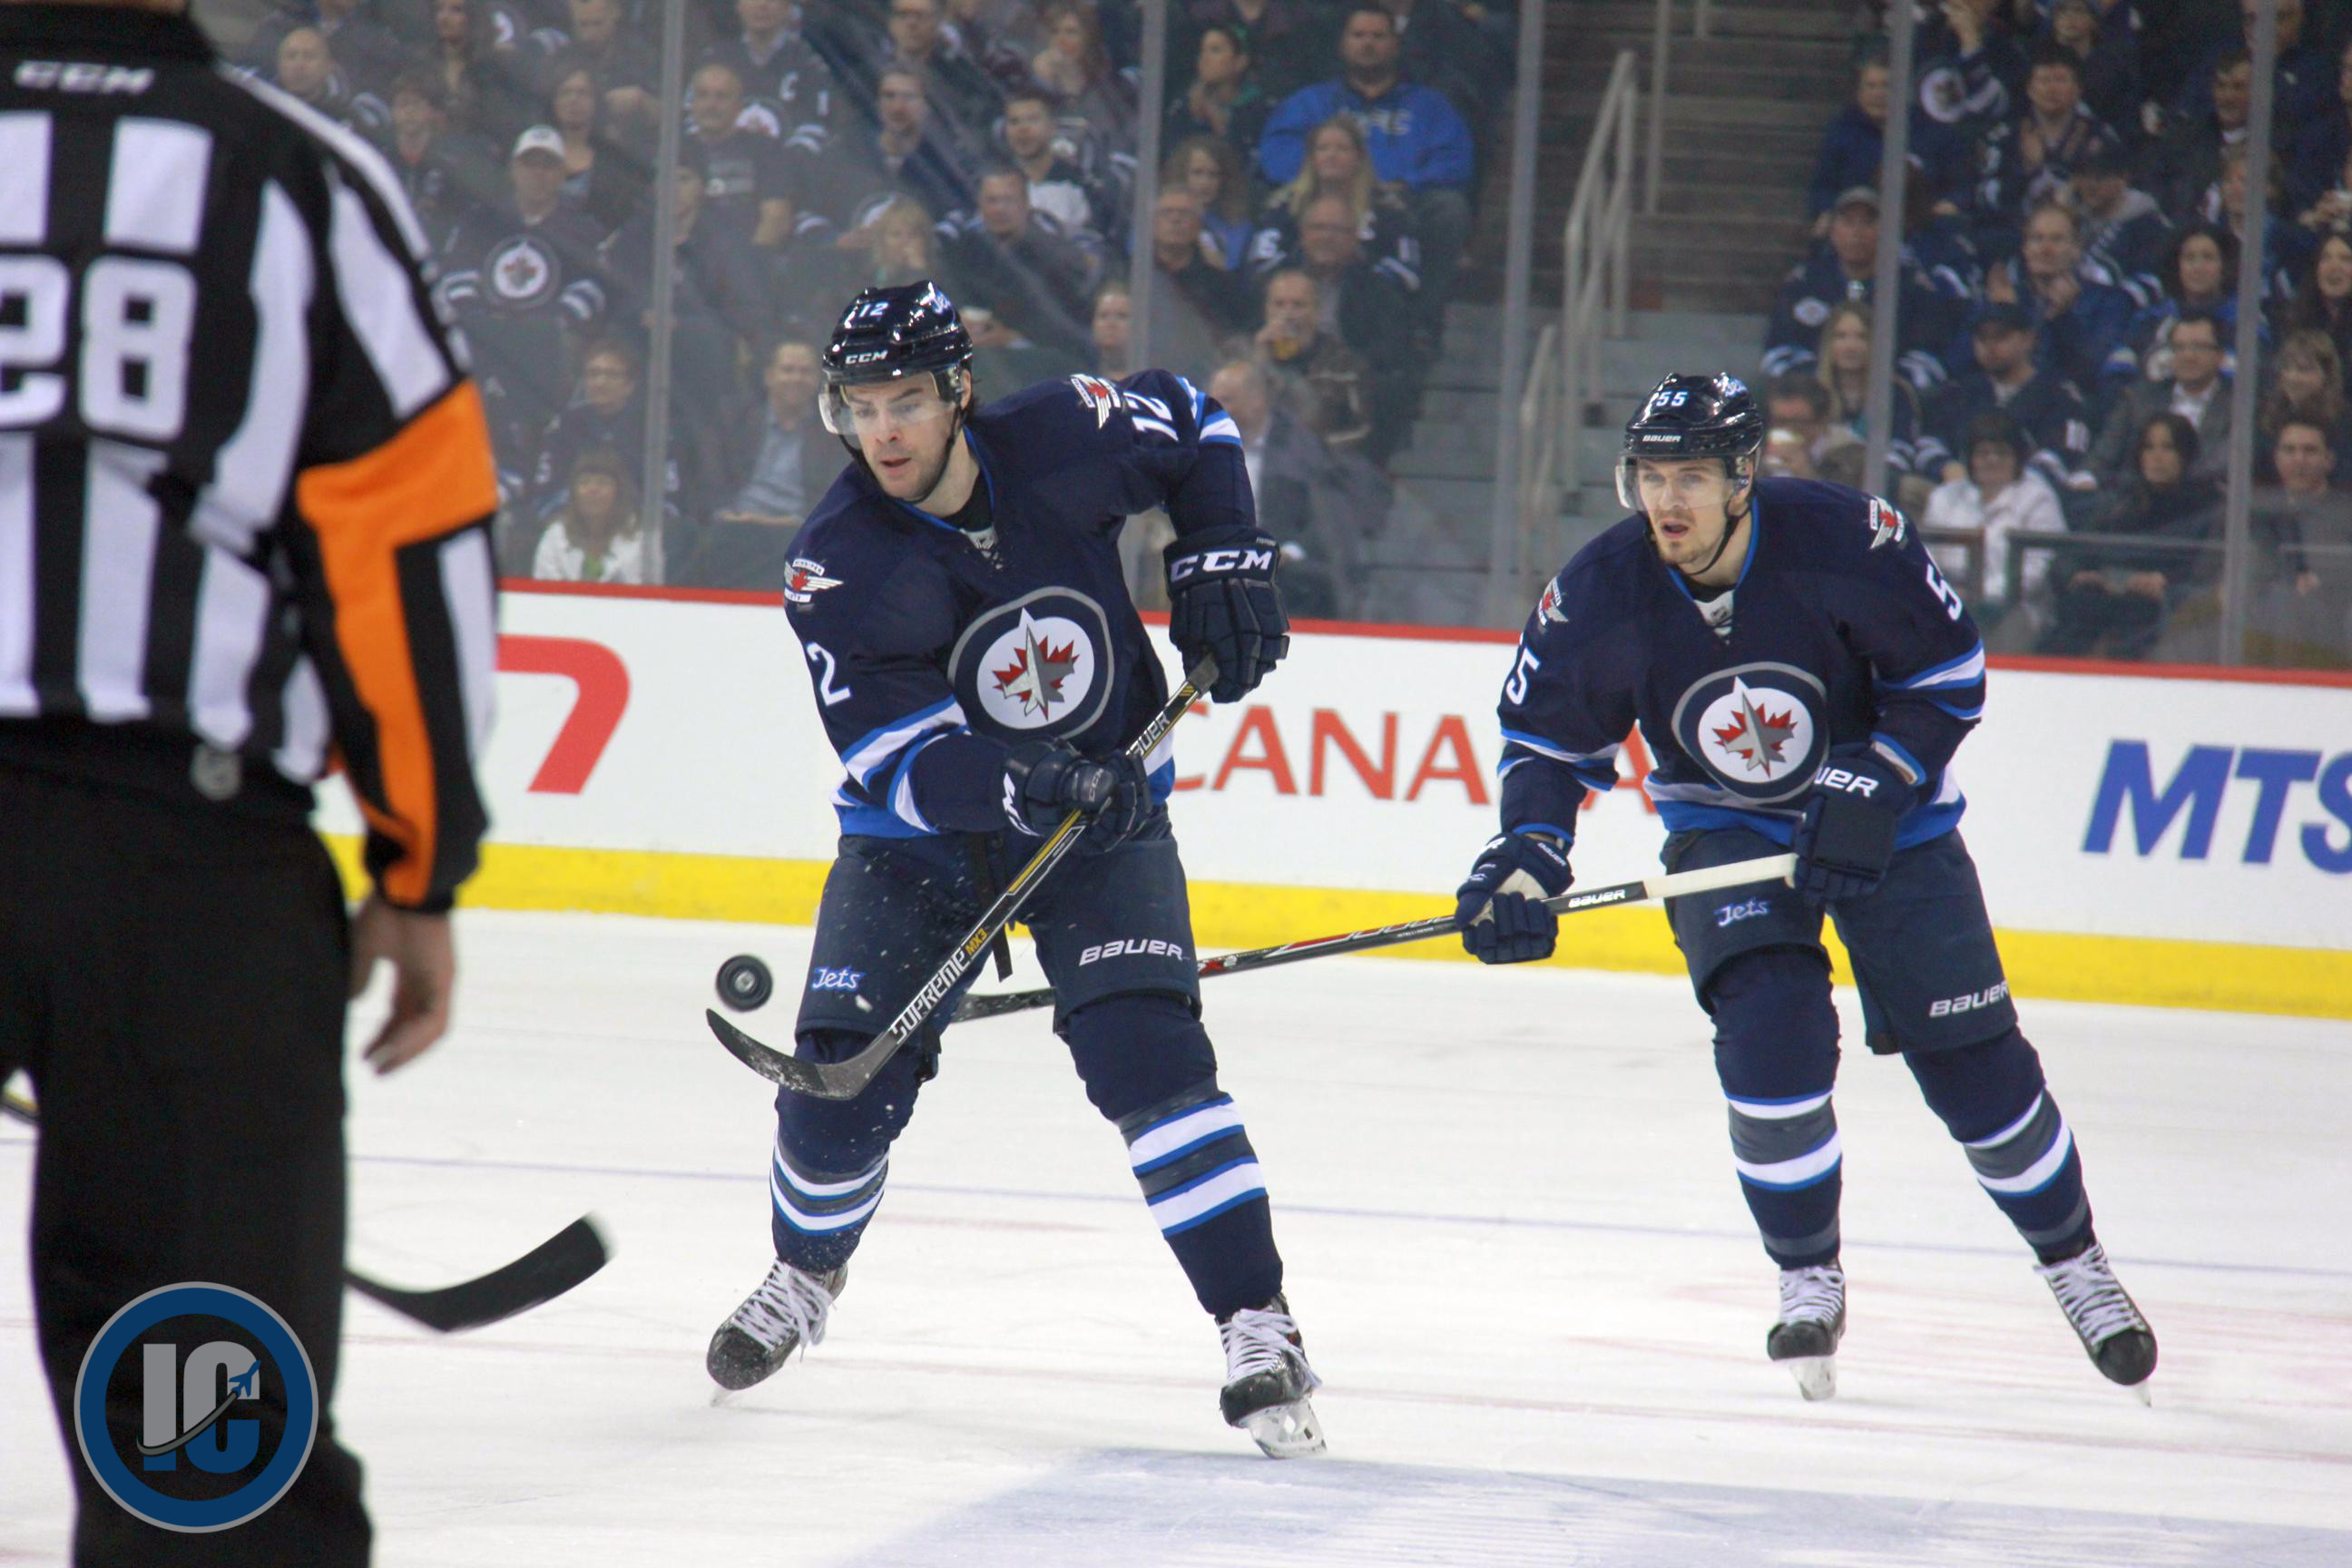 Stafford with puck Scheifele following up